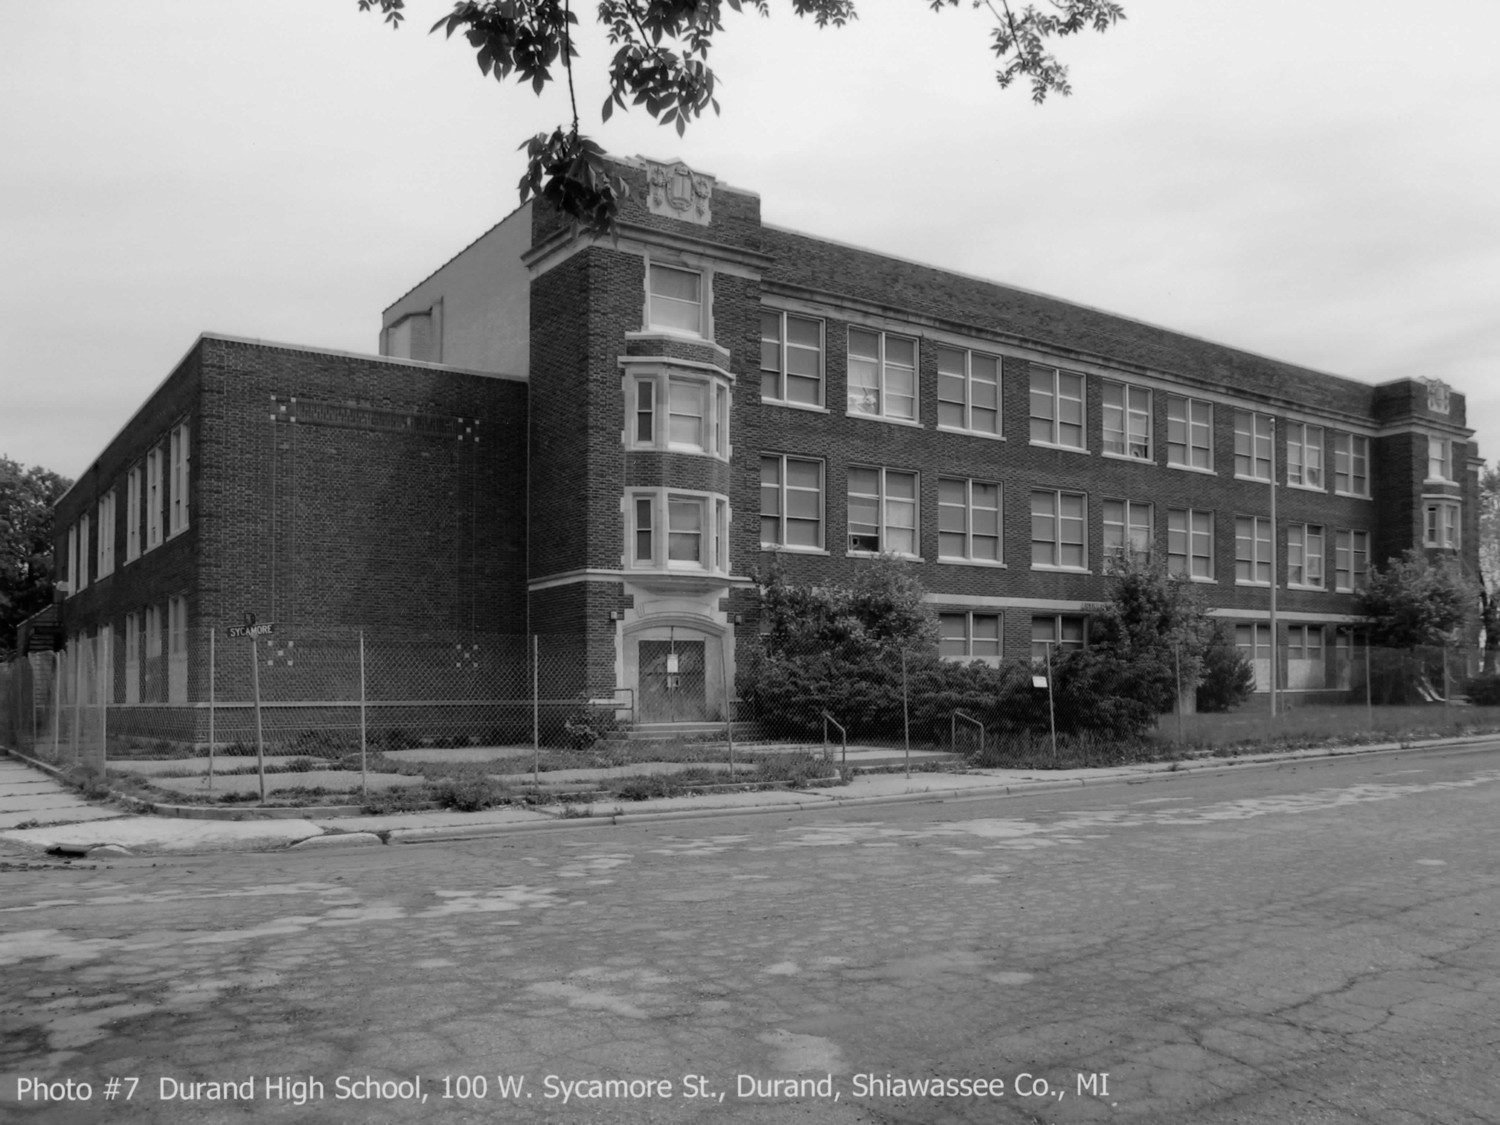 Durand High School, Durand Michigan South and West facades (2008)